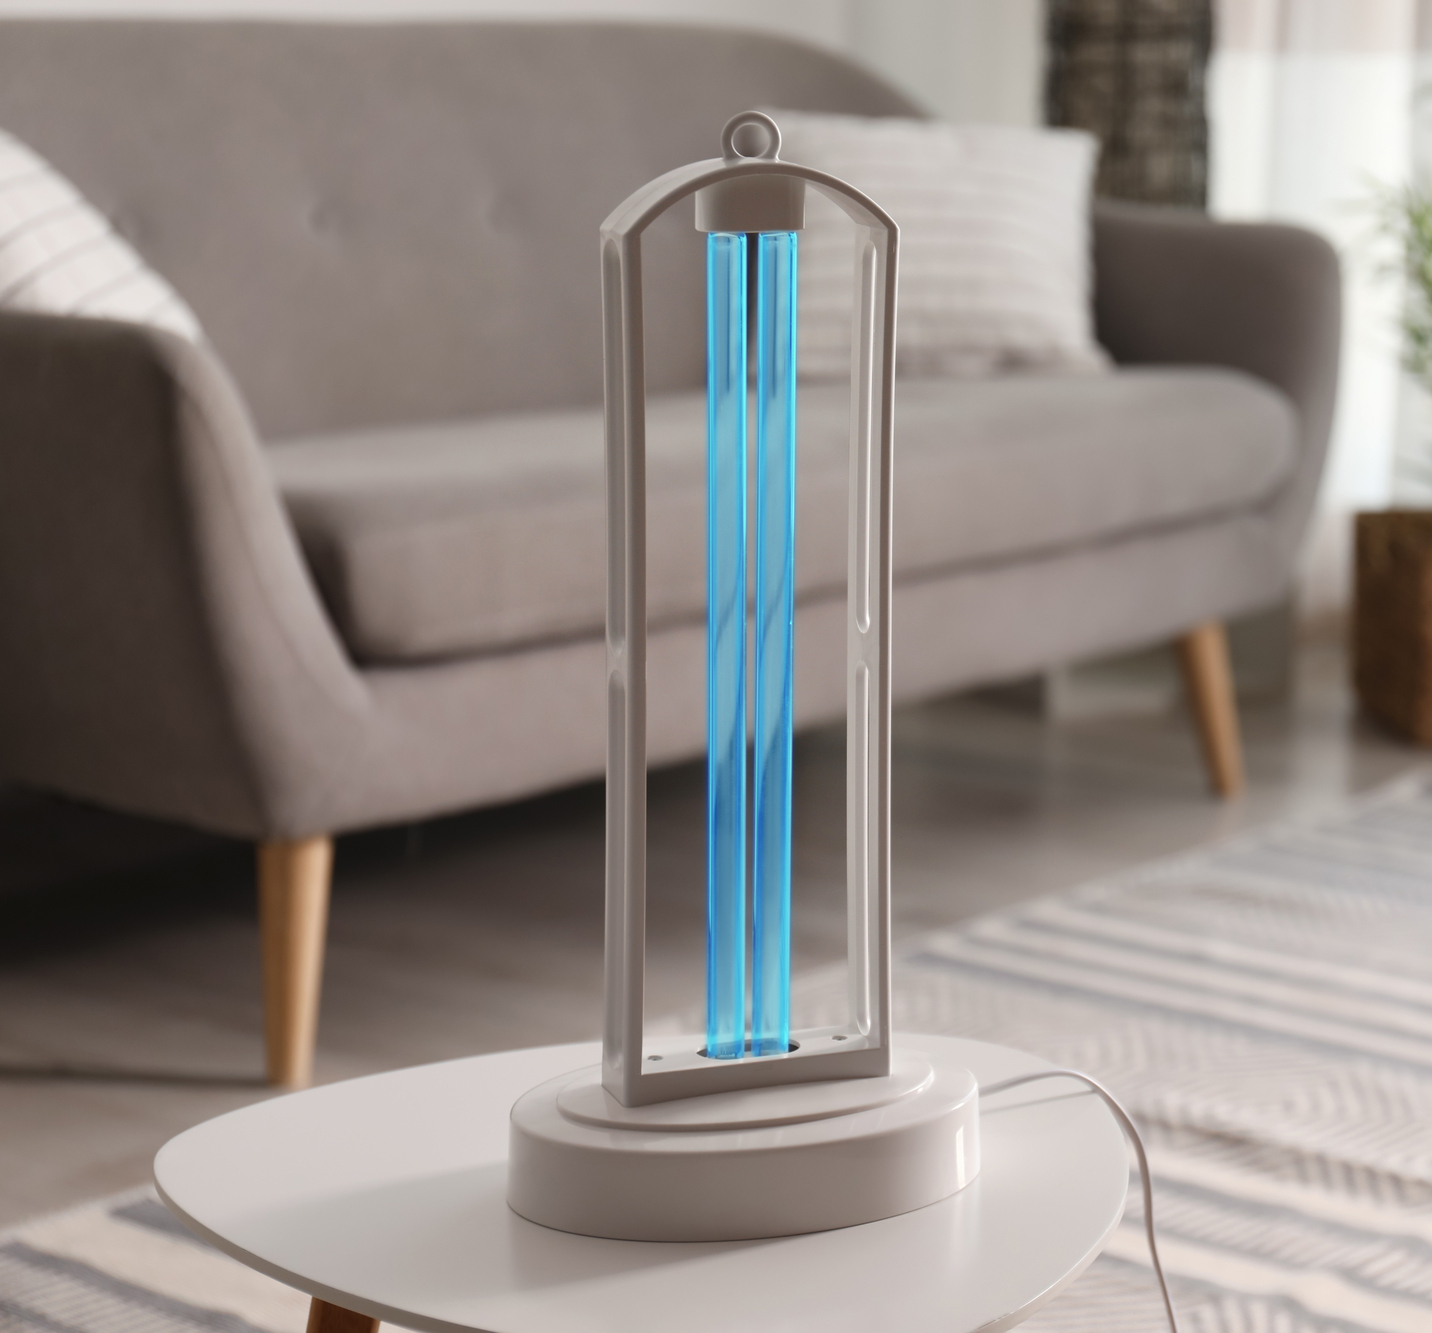 Air purifier in a living room